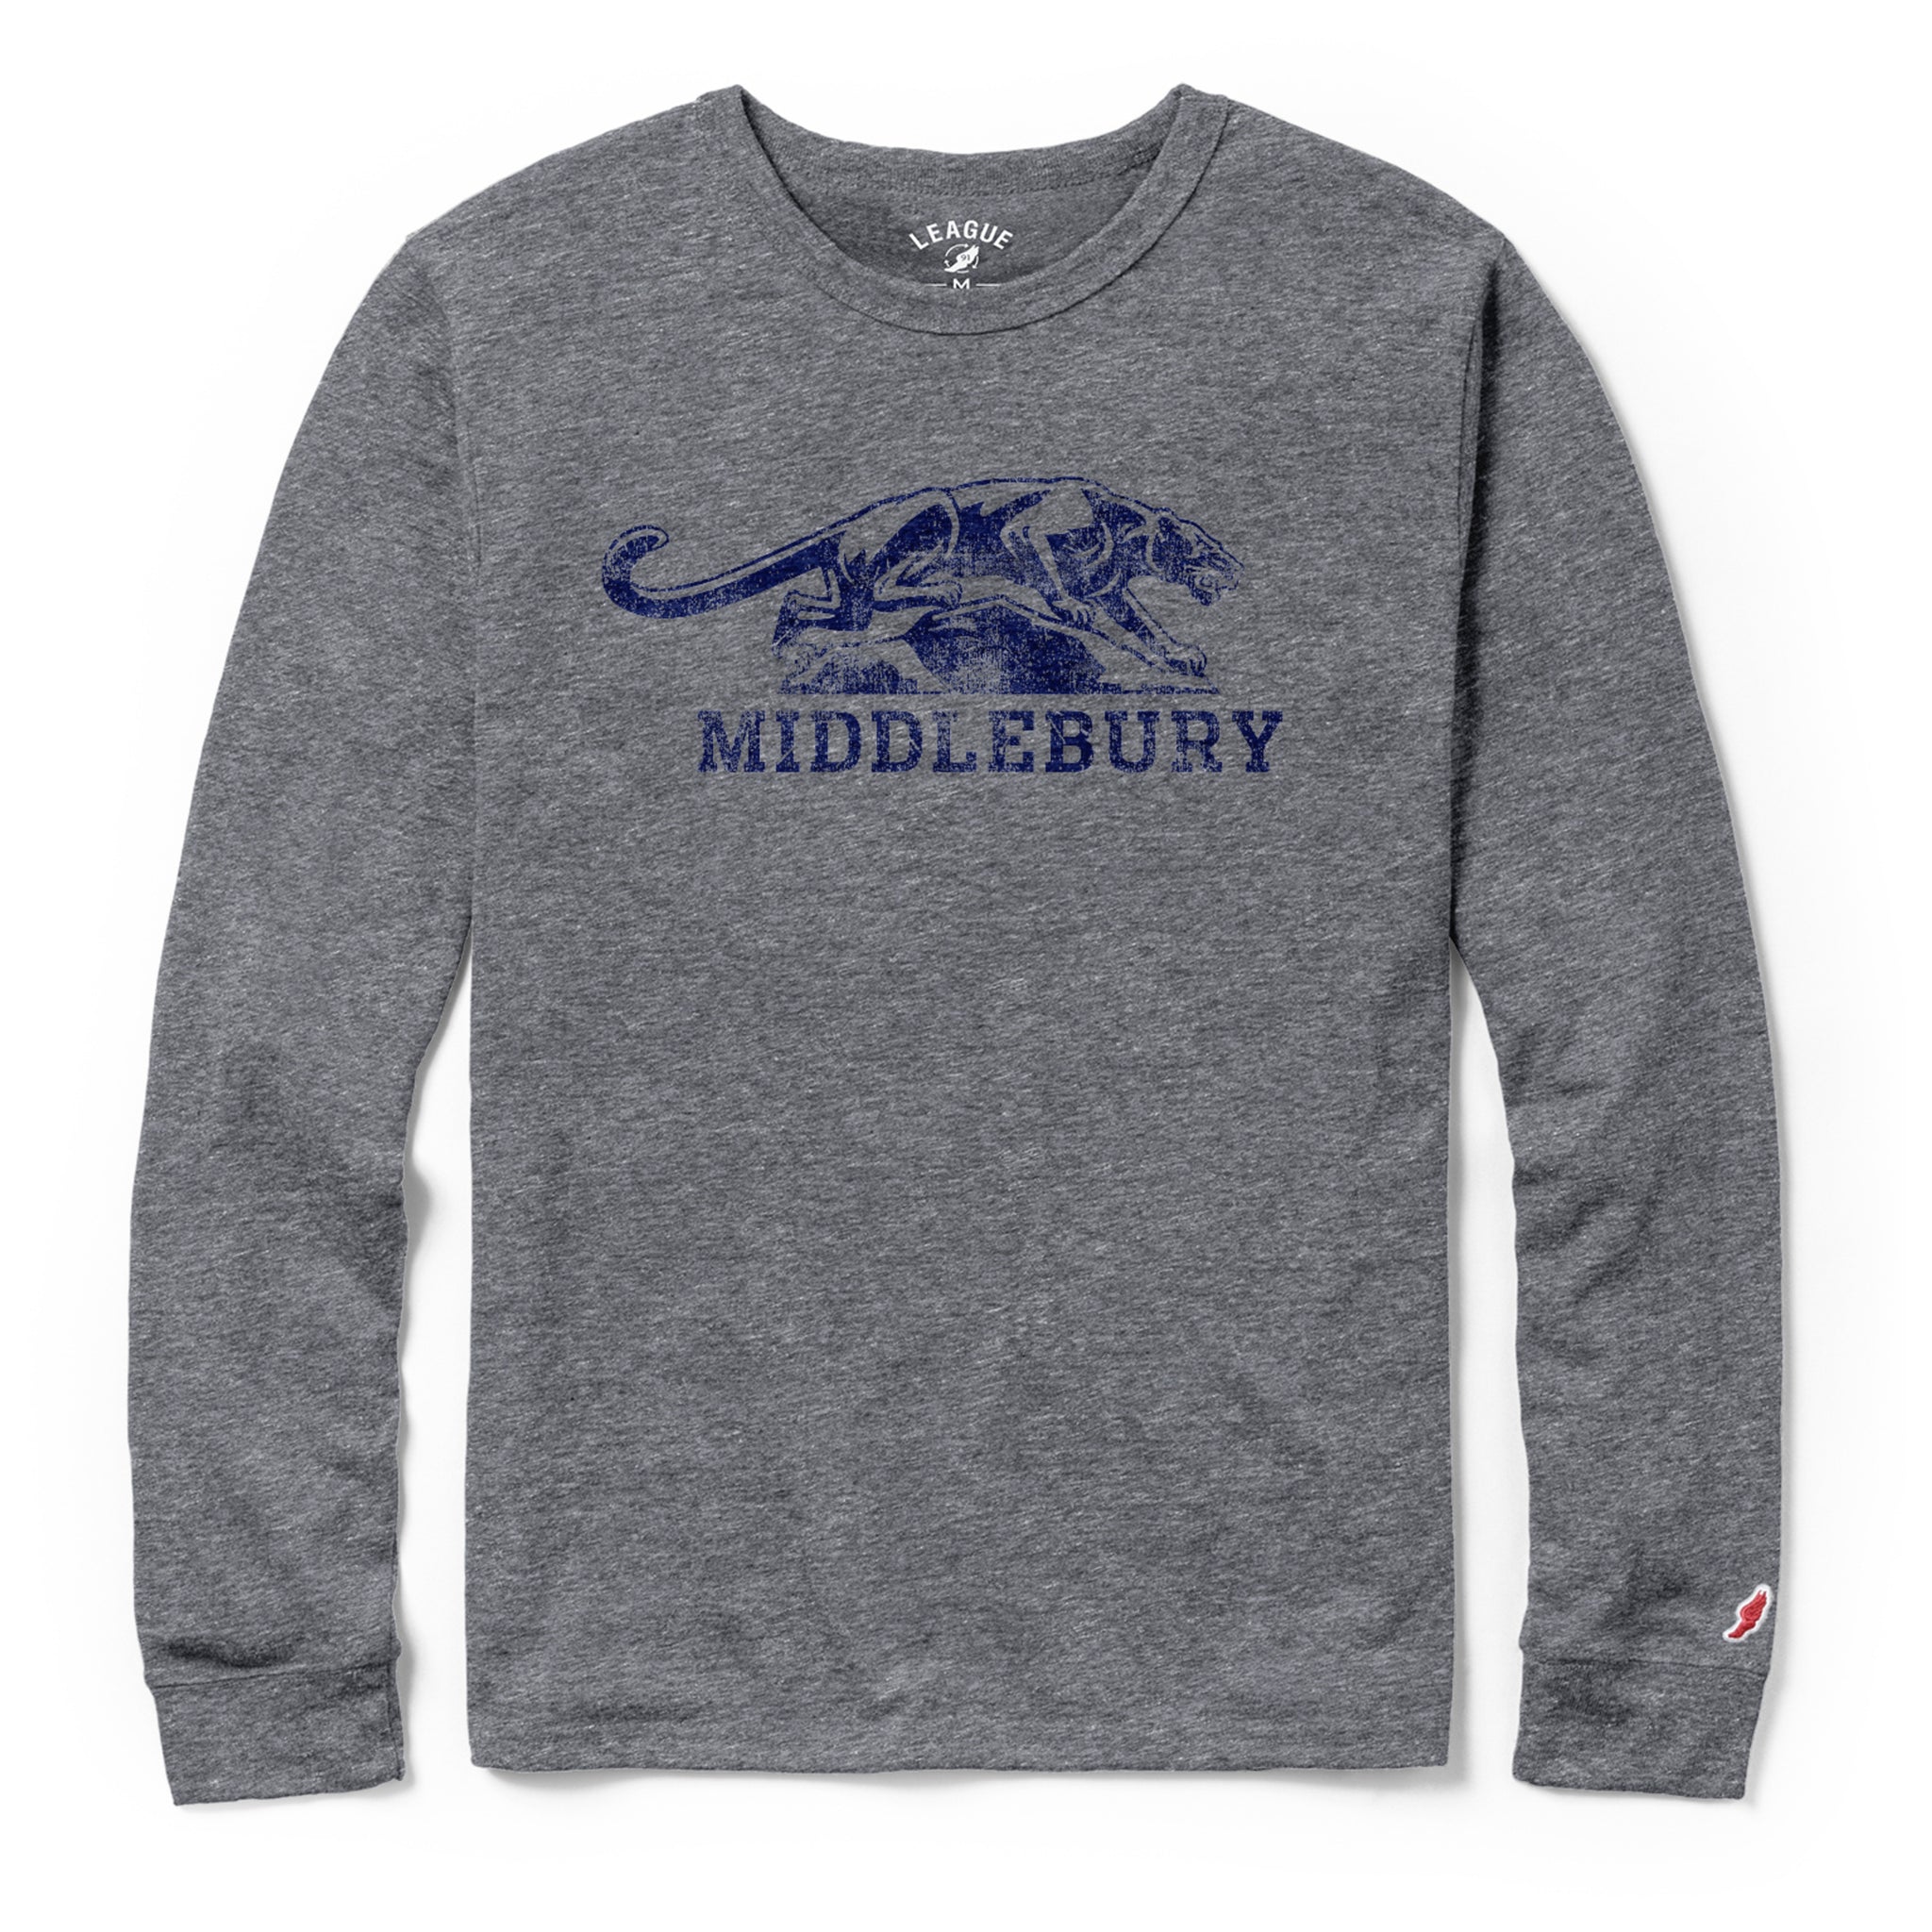 Middlebury Panther Long Sleeve Tee (grey)